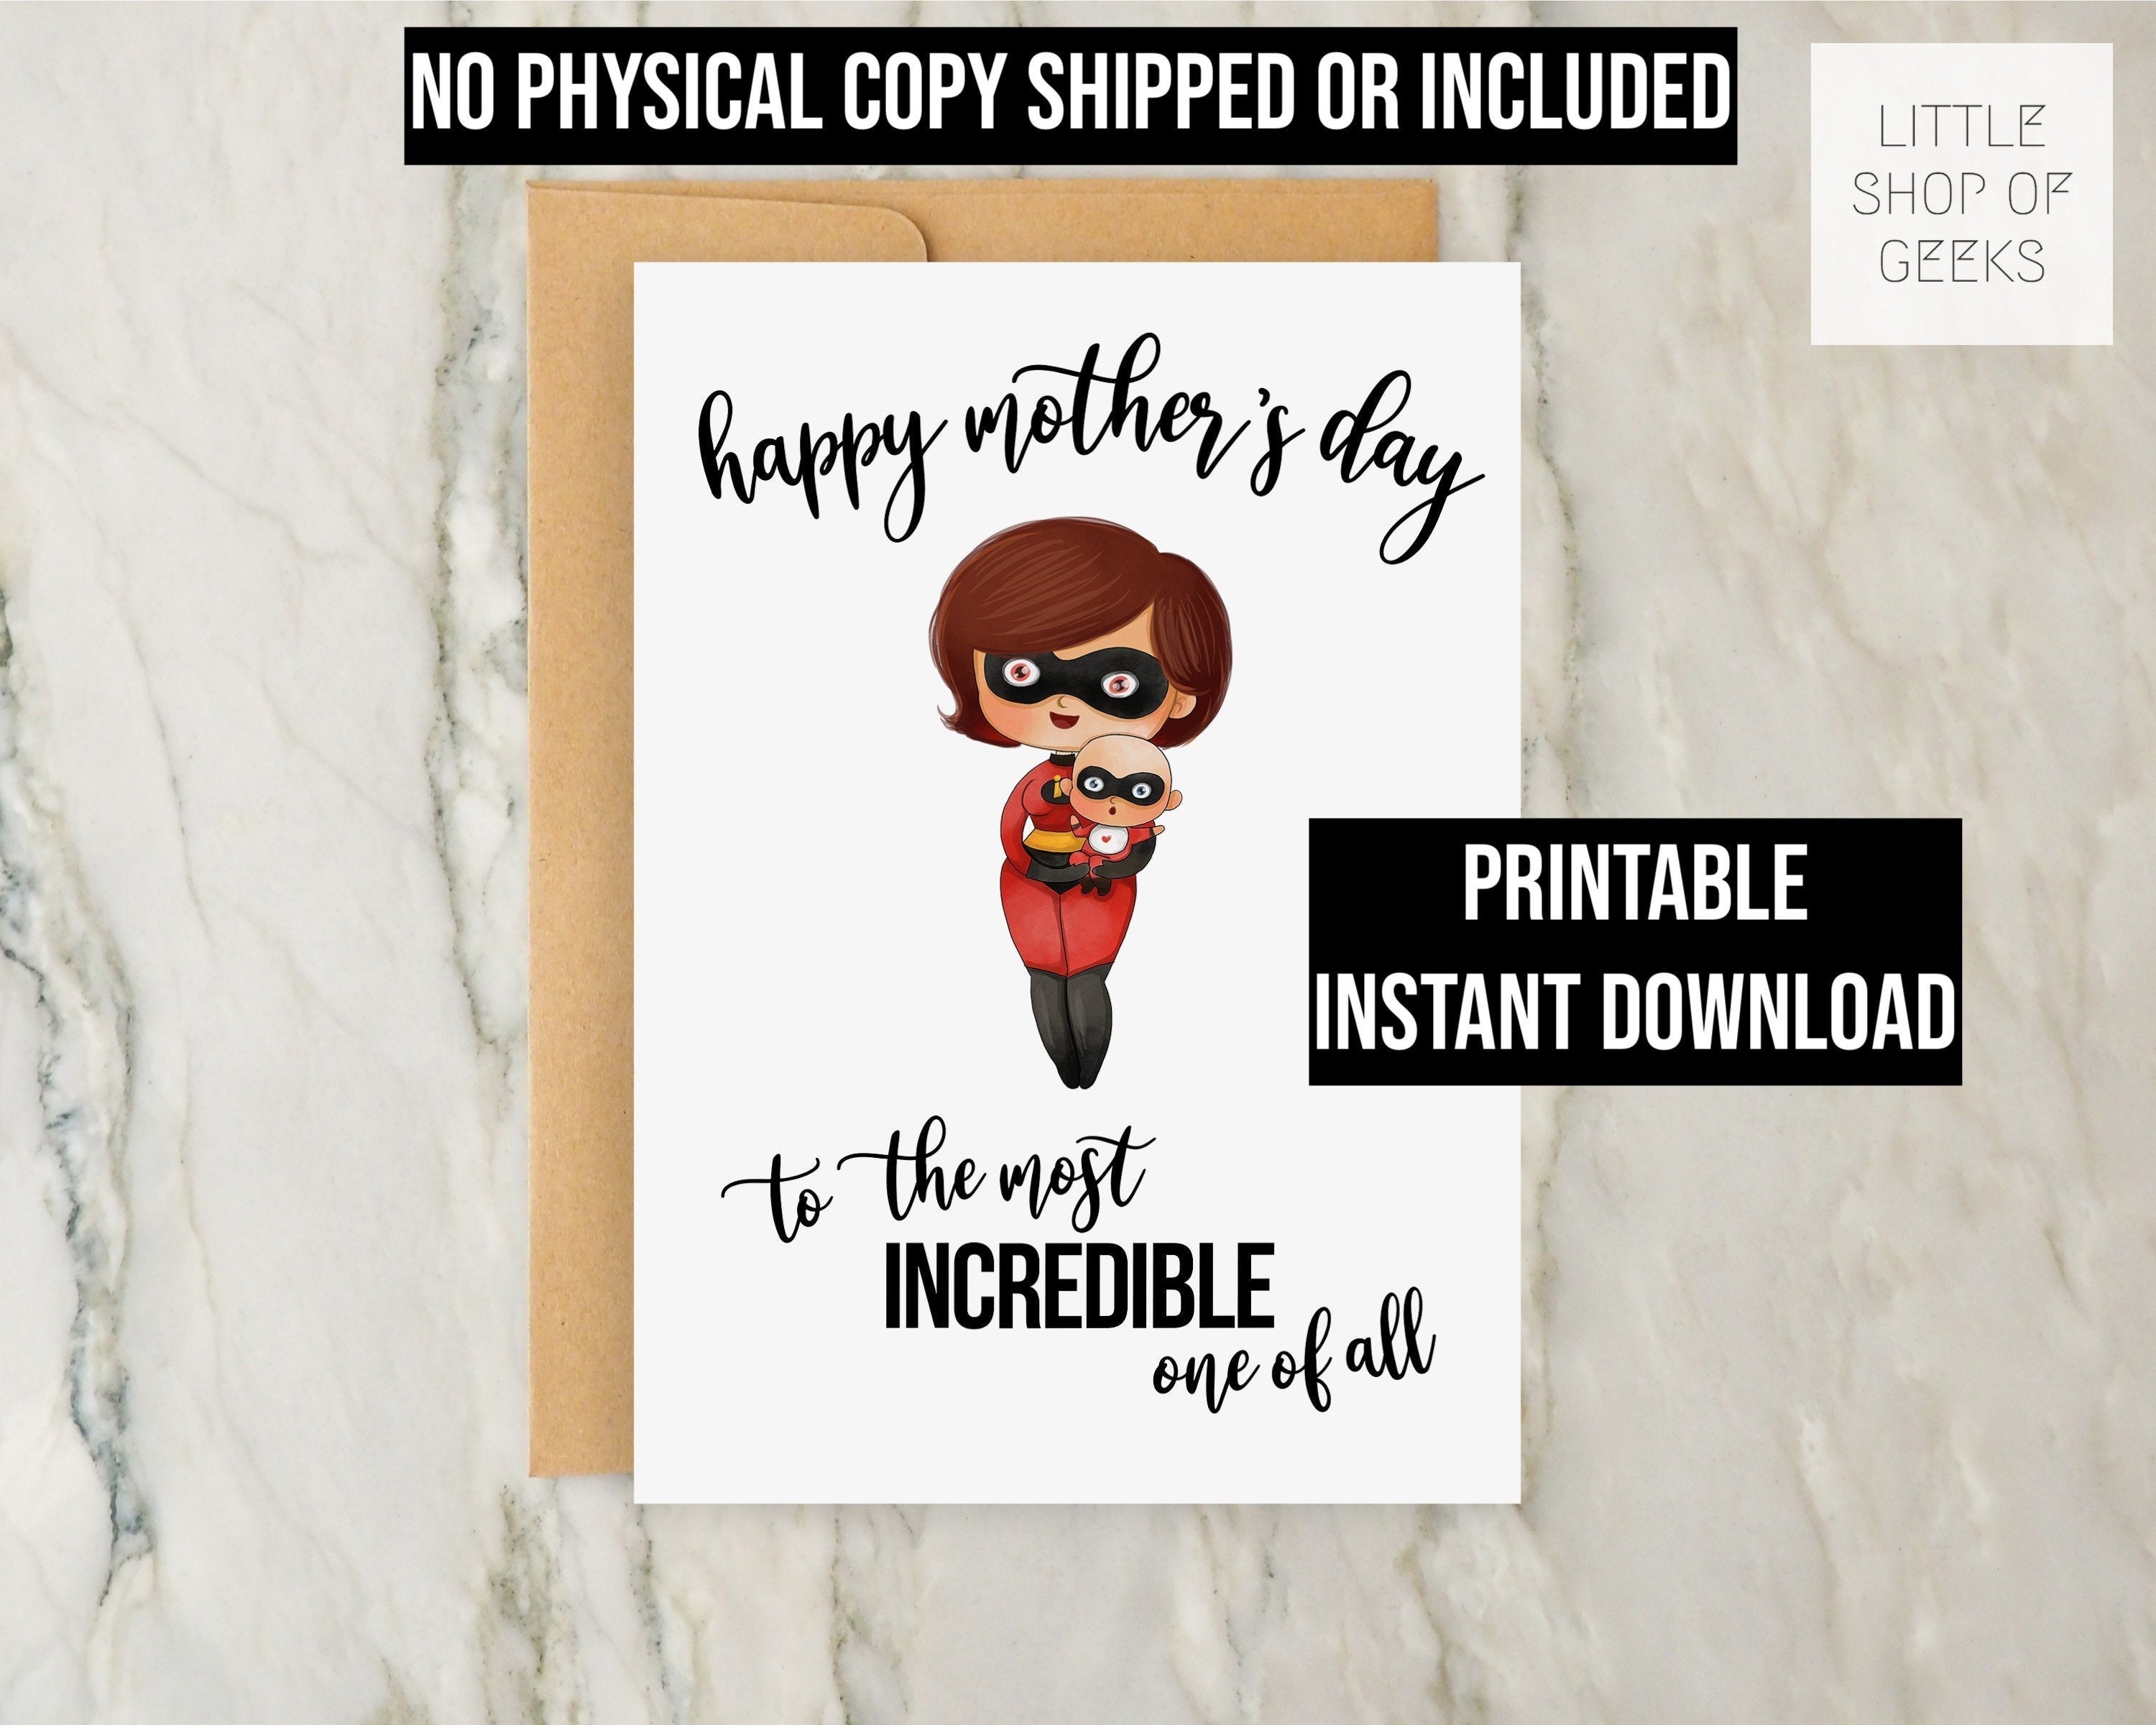 Incredibles Movie Pop Culture Cute Illustration of Incredible Mom and JackJack Greeting Instant Download